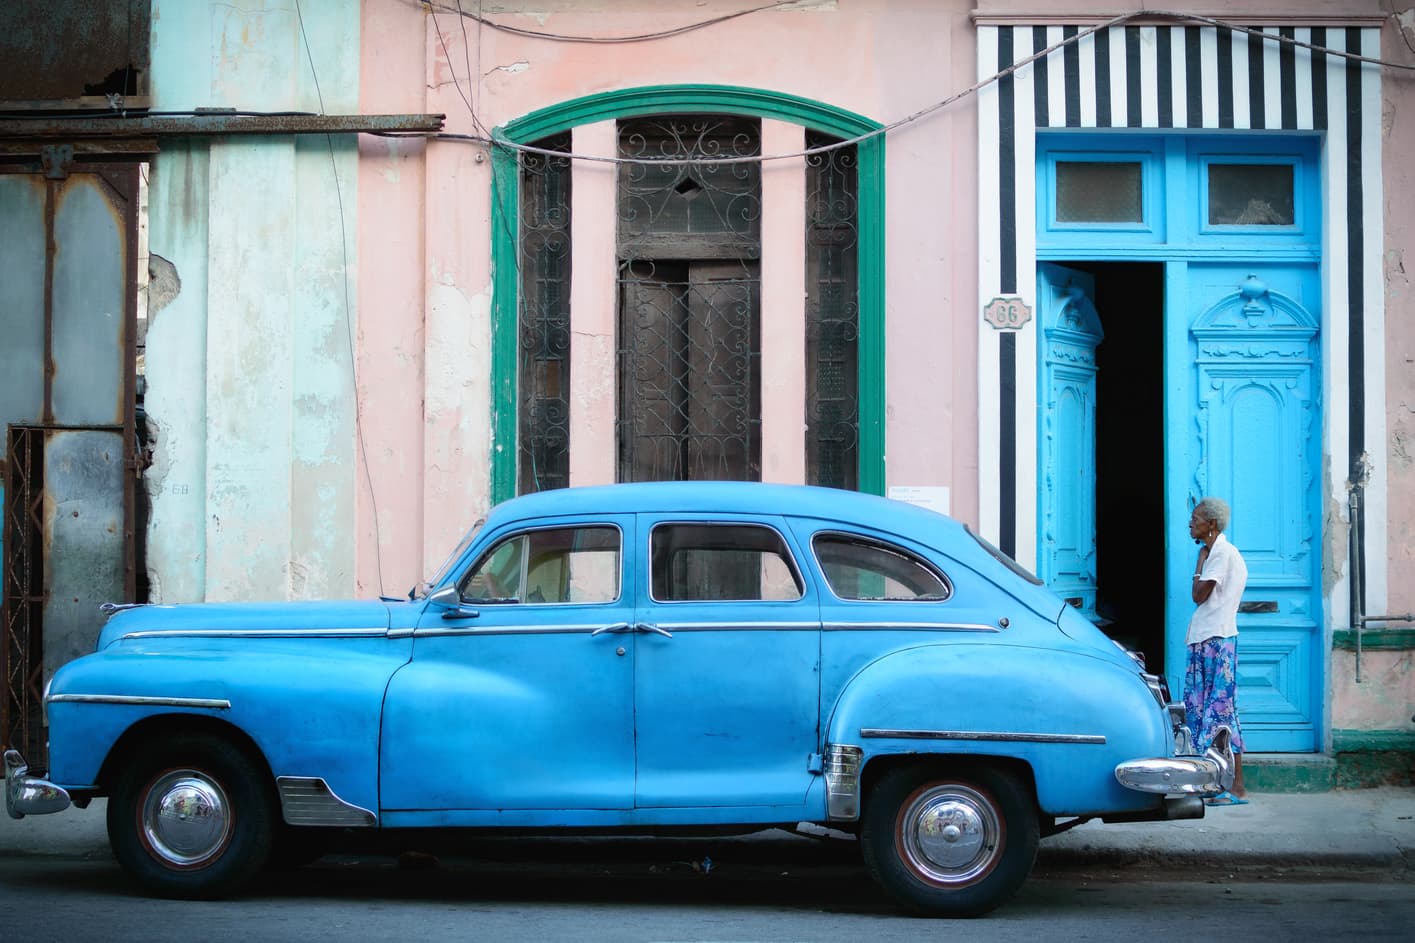 Blue car Havana madame. Guide to top things to do in Havana